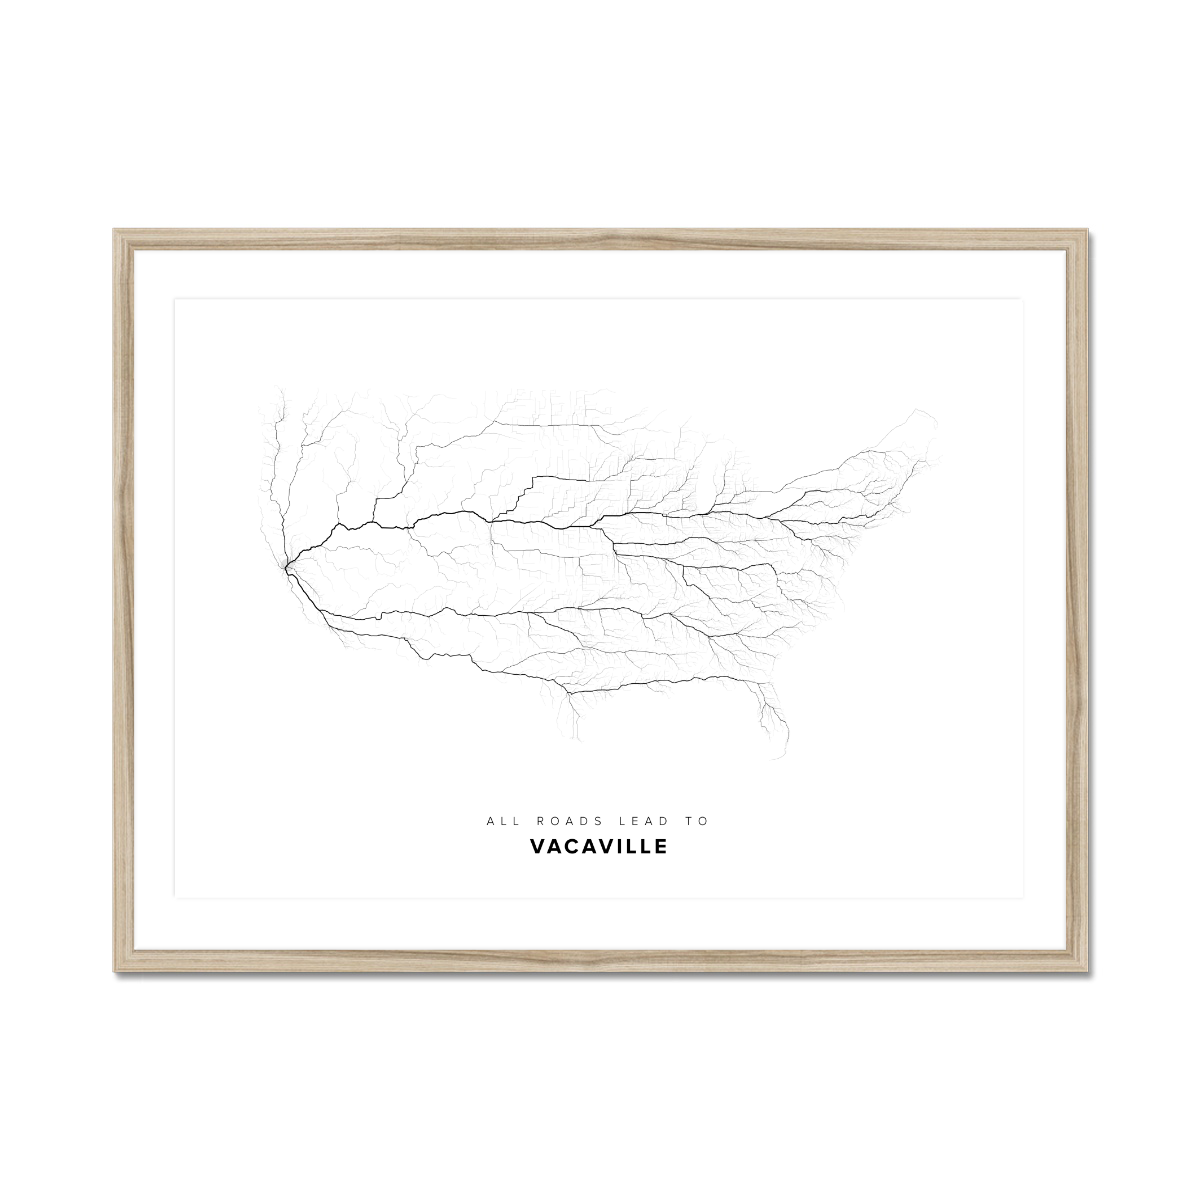 All roads lead to Vacaville (United States of America) Fine Art Map Print